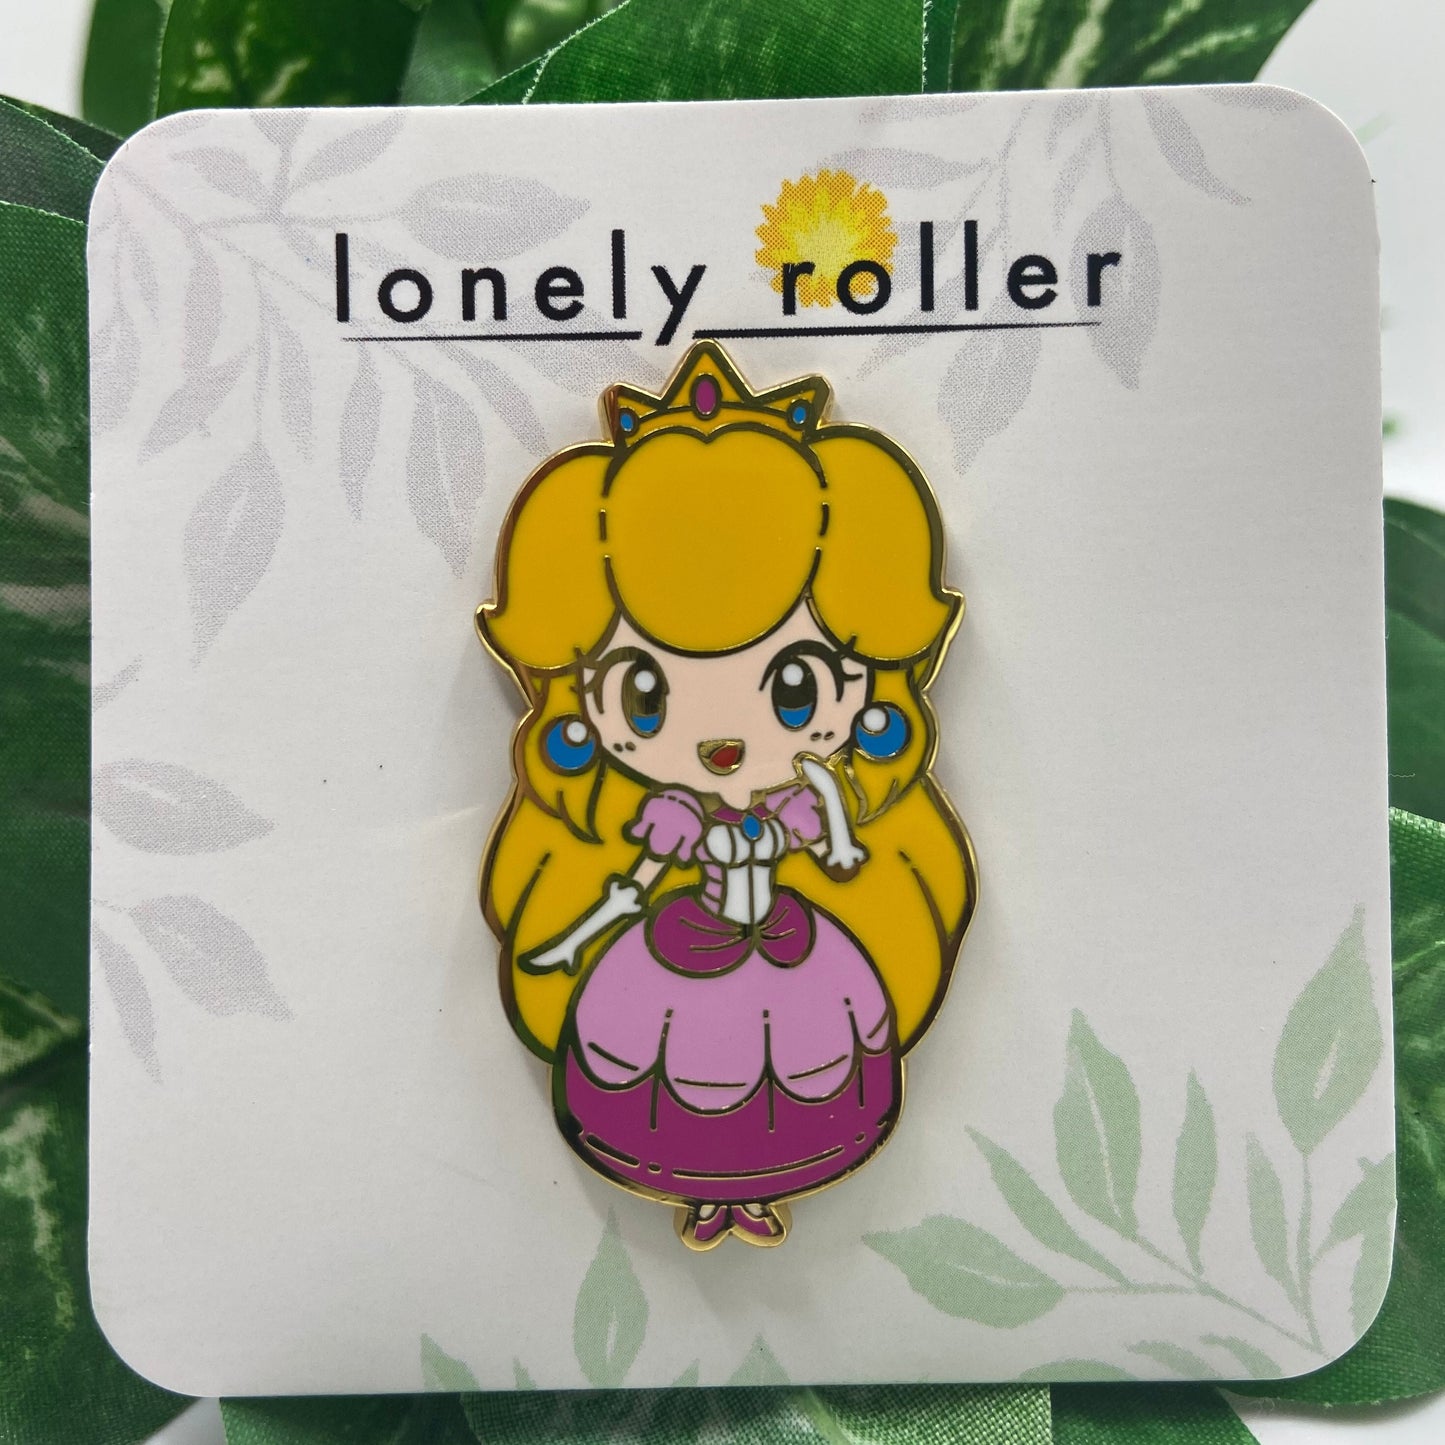 Super Mario Princess Peach Enamel Pin on Backing Card with "lonely roller" text